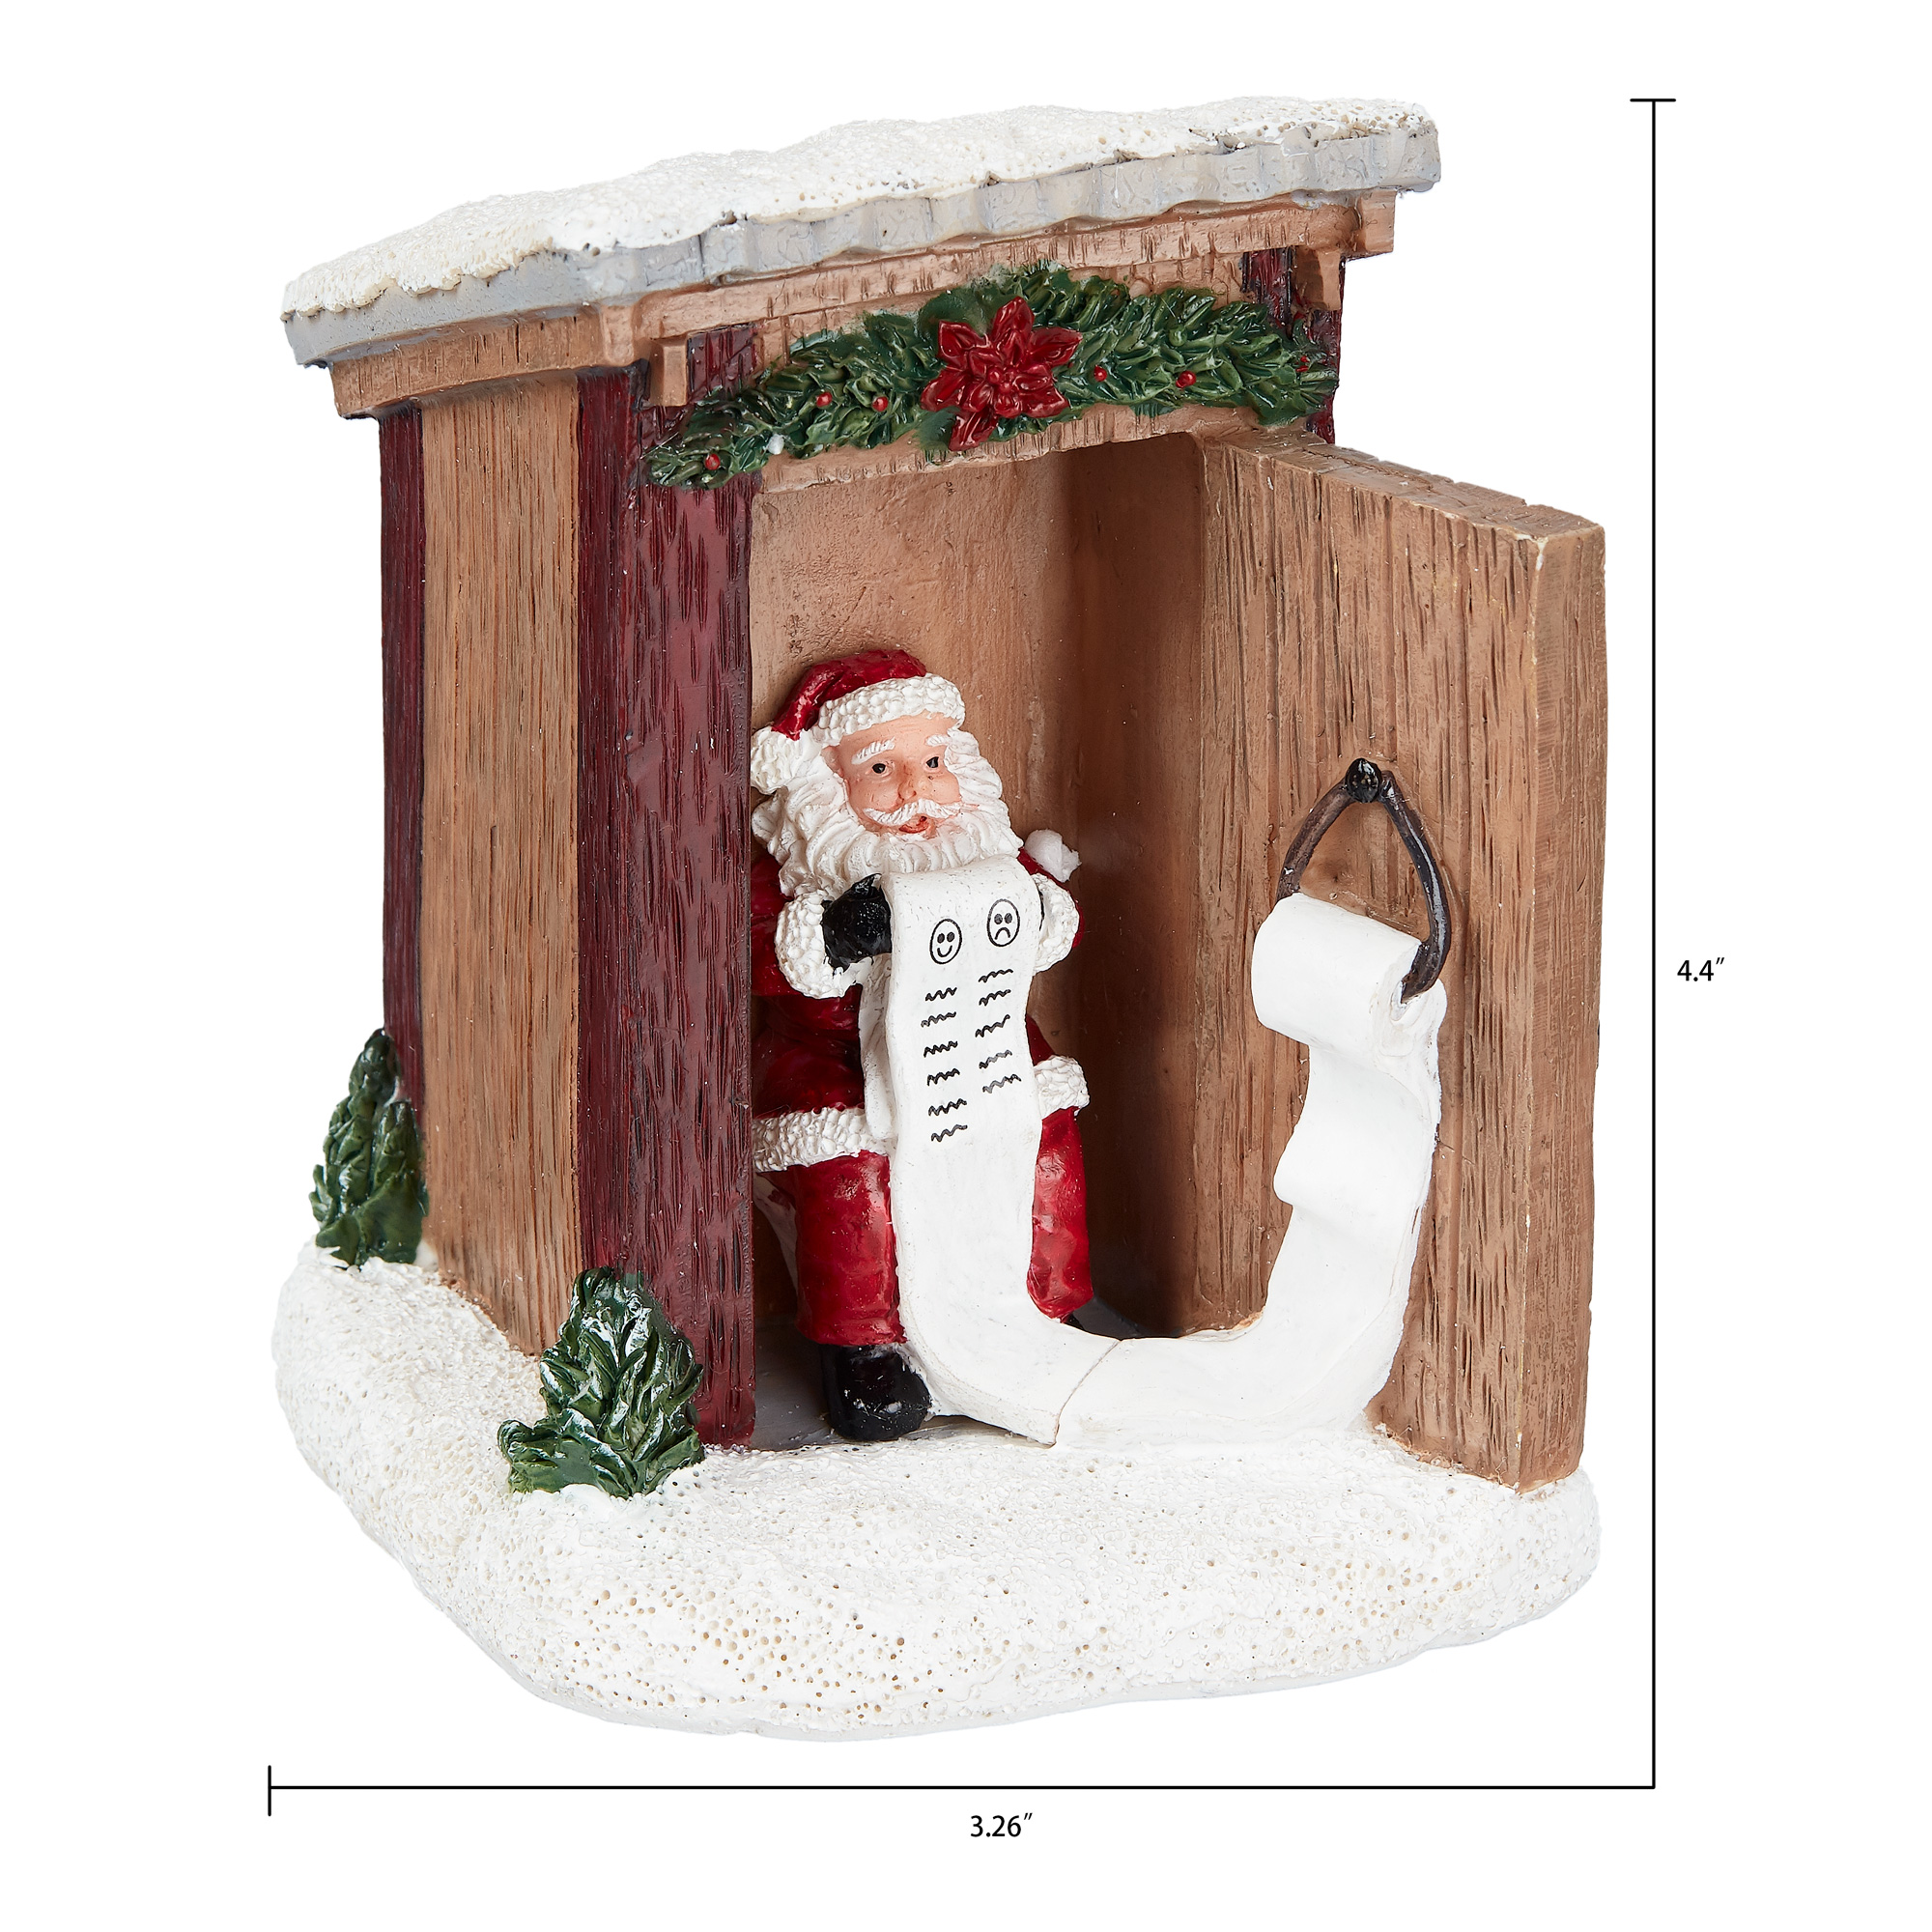 Holiday Time Santa in Outhouse Christmas Village Collectible Figurine Table Top Decoration - image 5 of 5